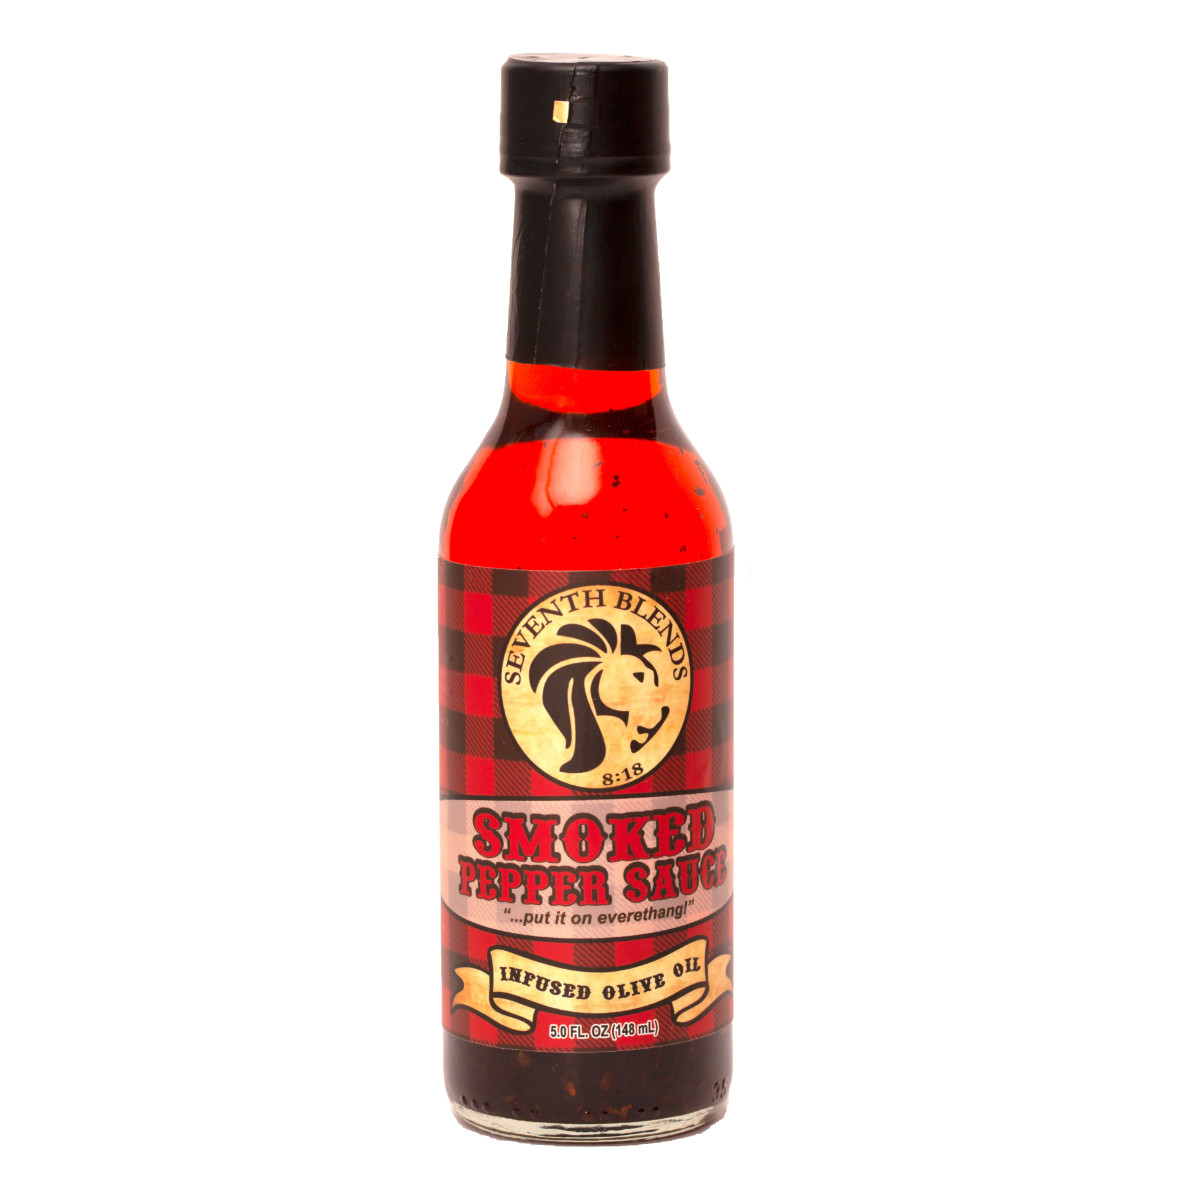 Smoked Pepper Sauce Product